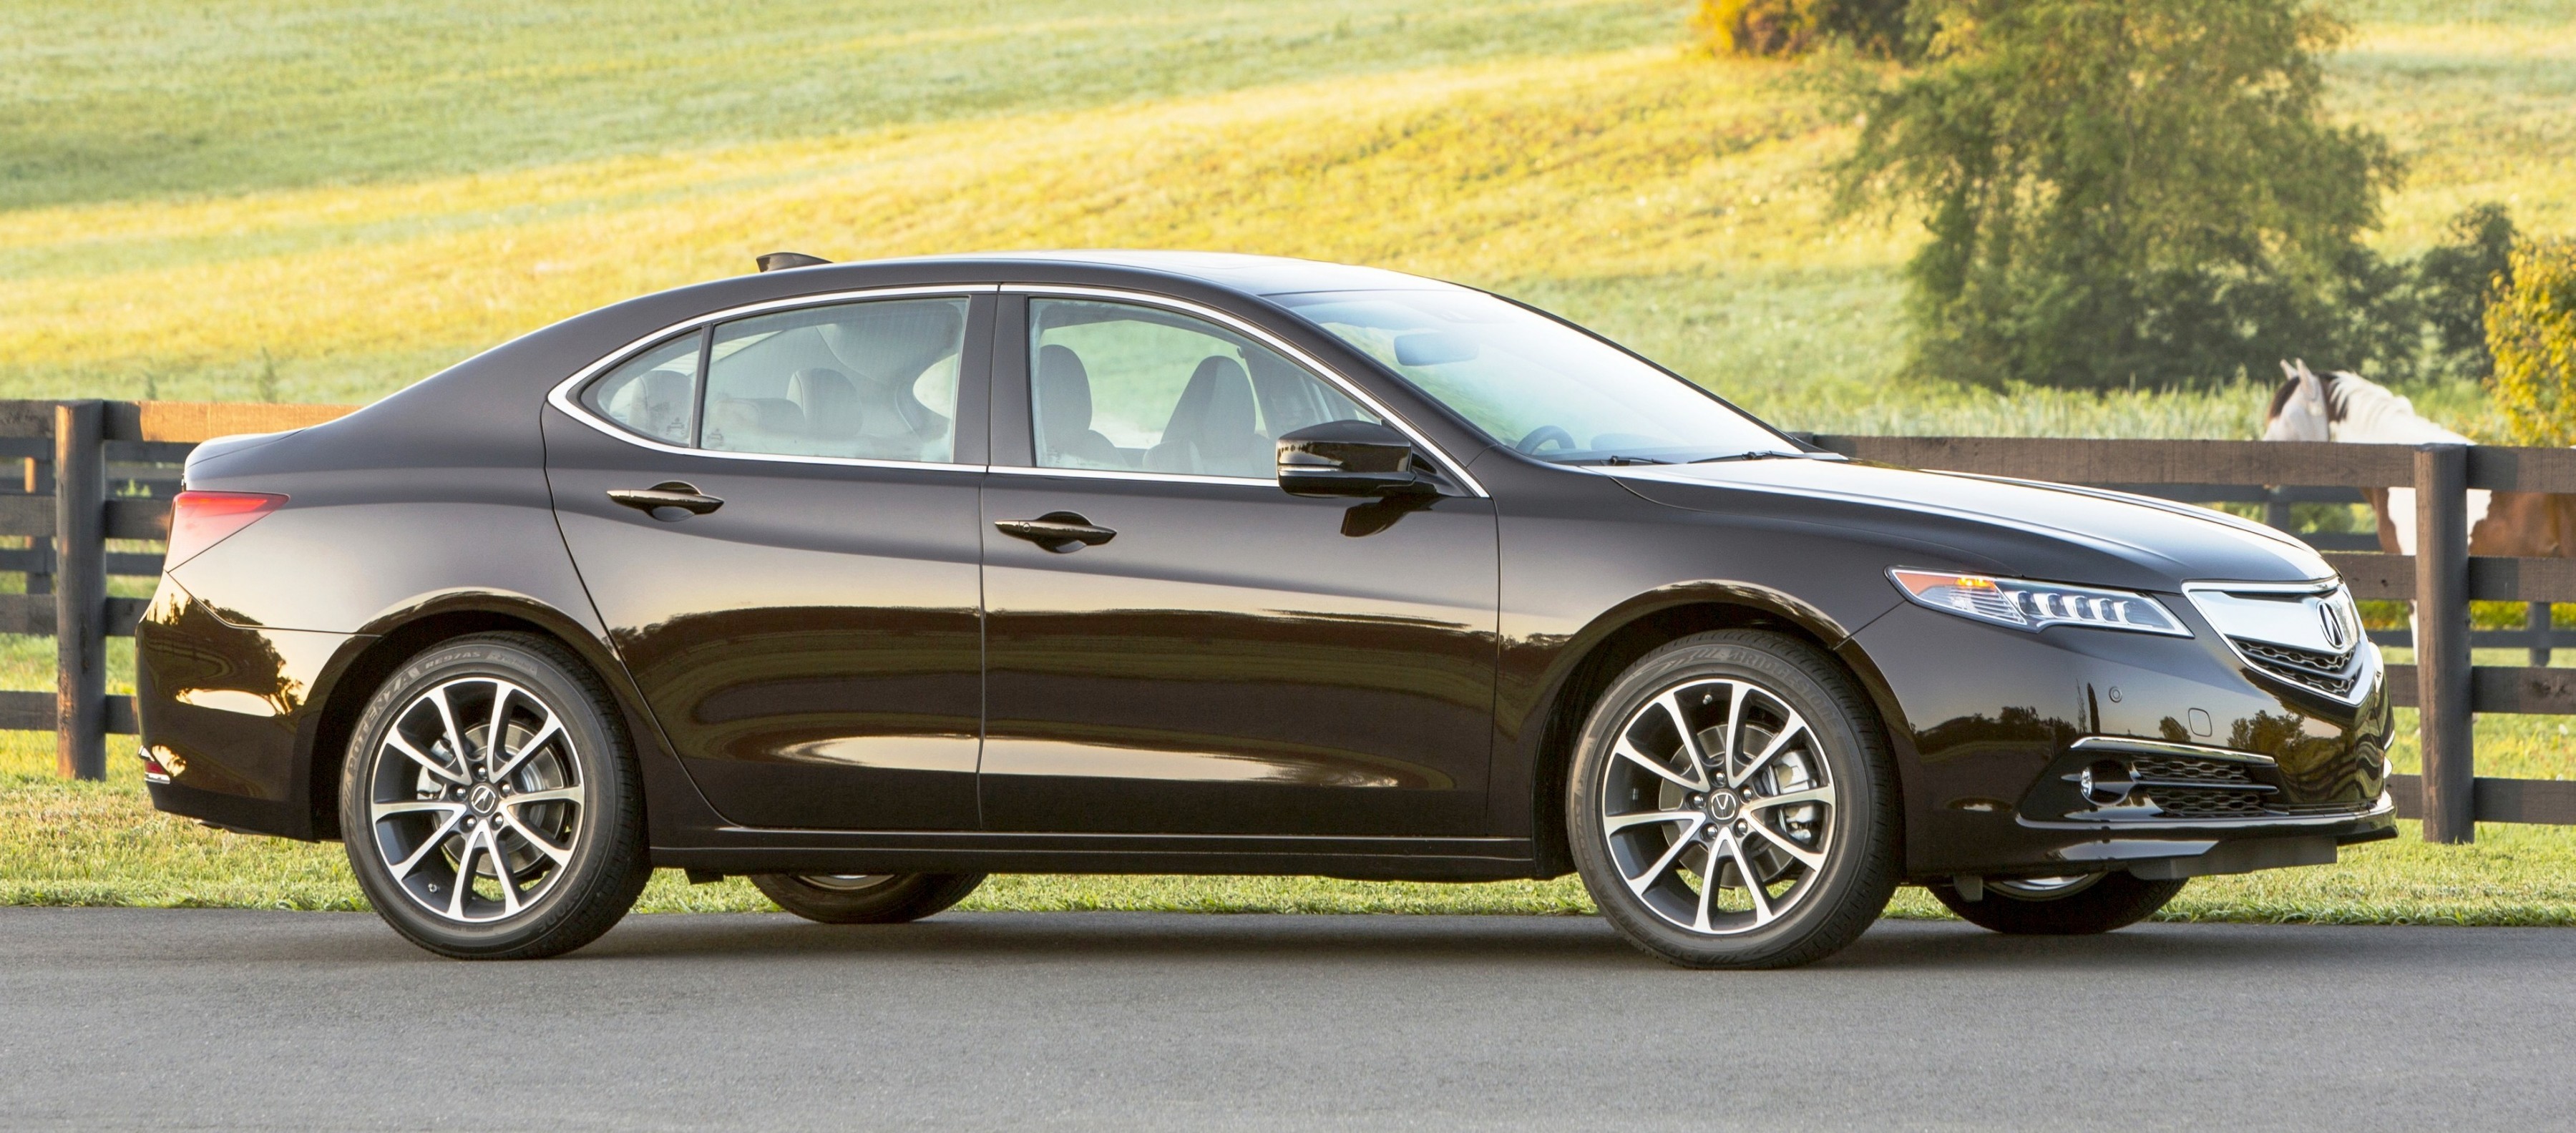 2015 Acura TLX Media Launch Brings 100 New Photos, Pricing, Colors and